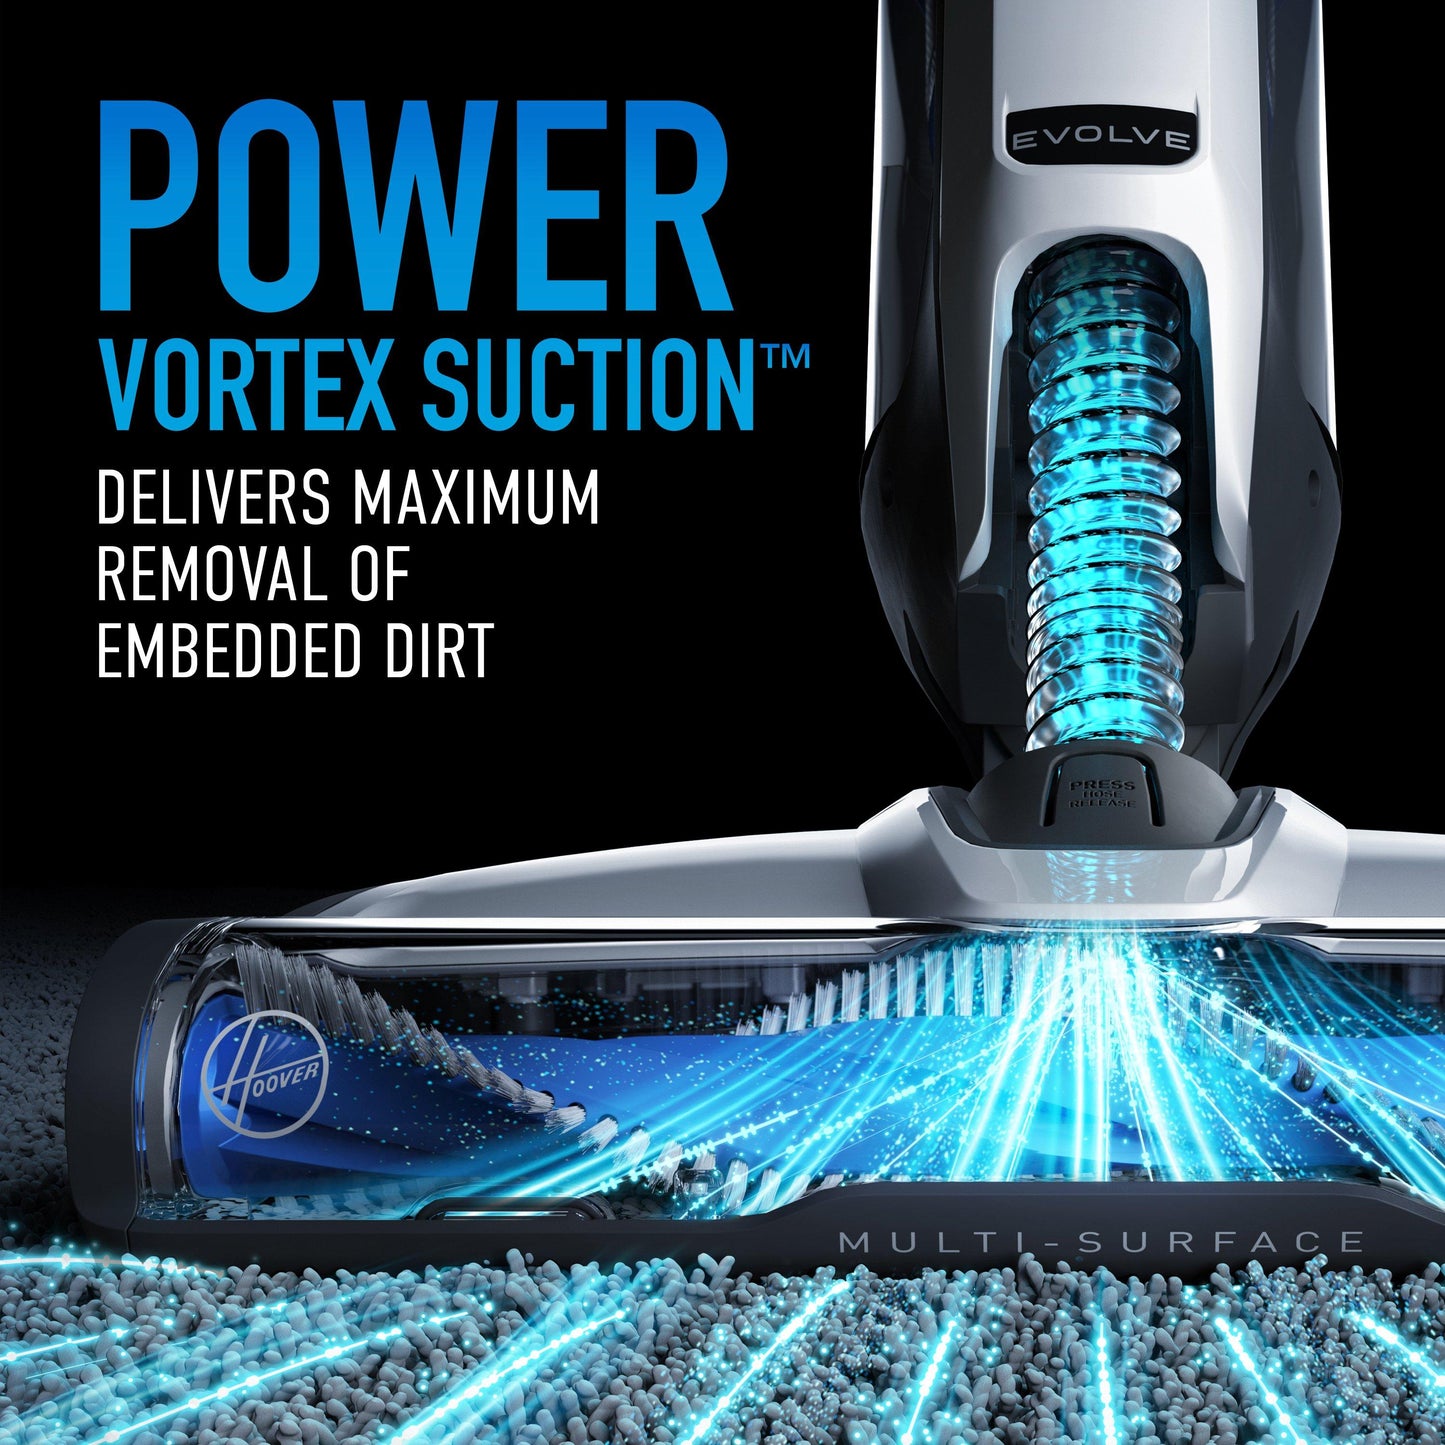 Power Vortex Suction delivers maximum removal of embedded dirt